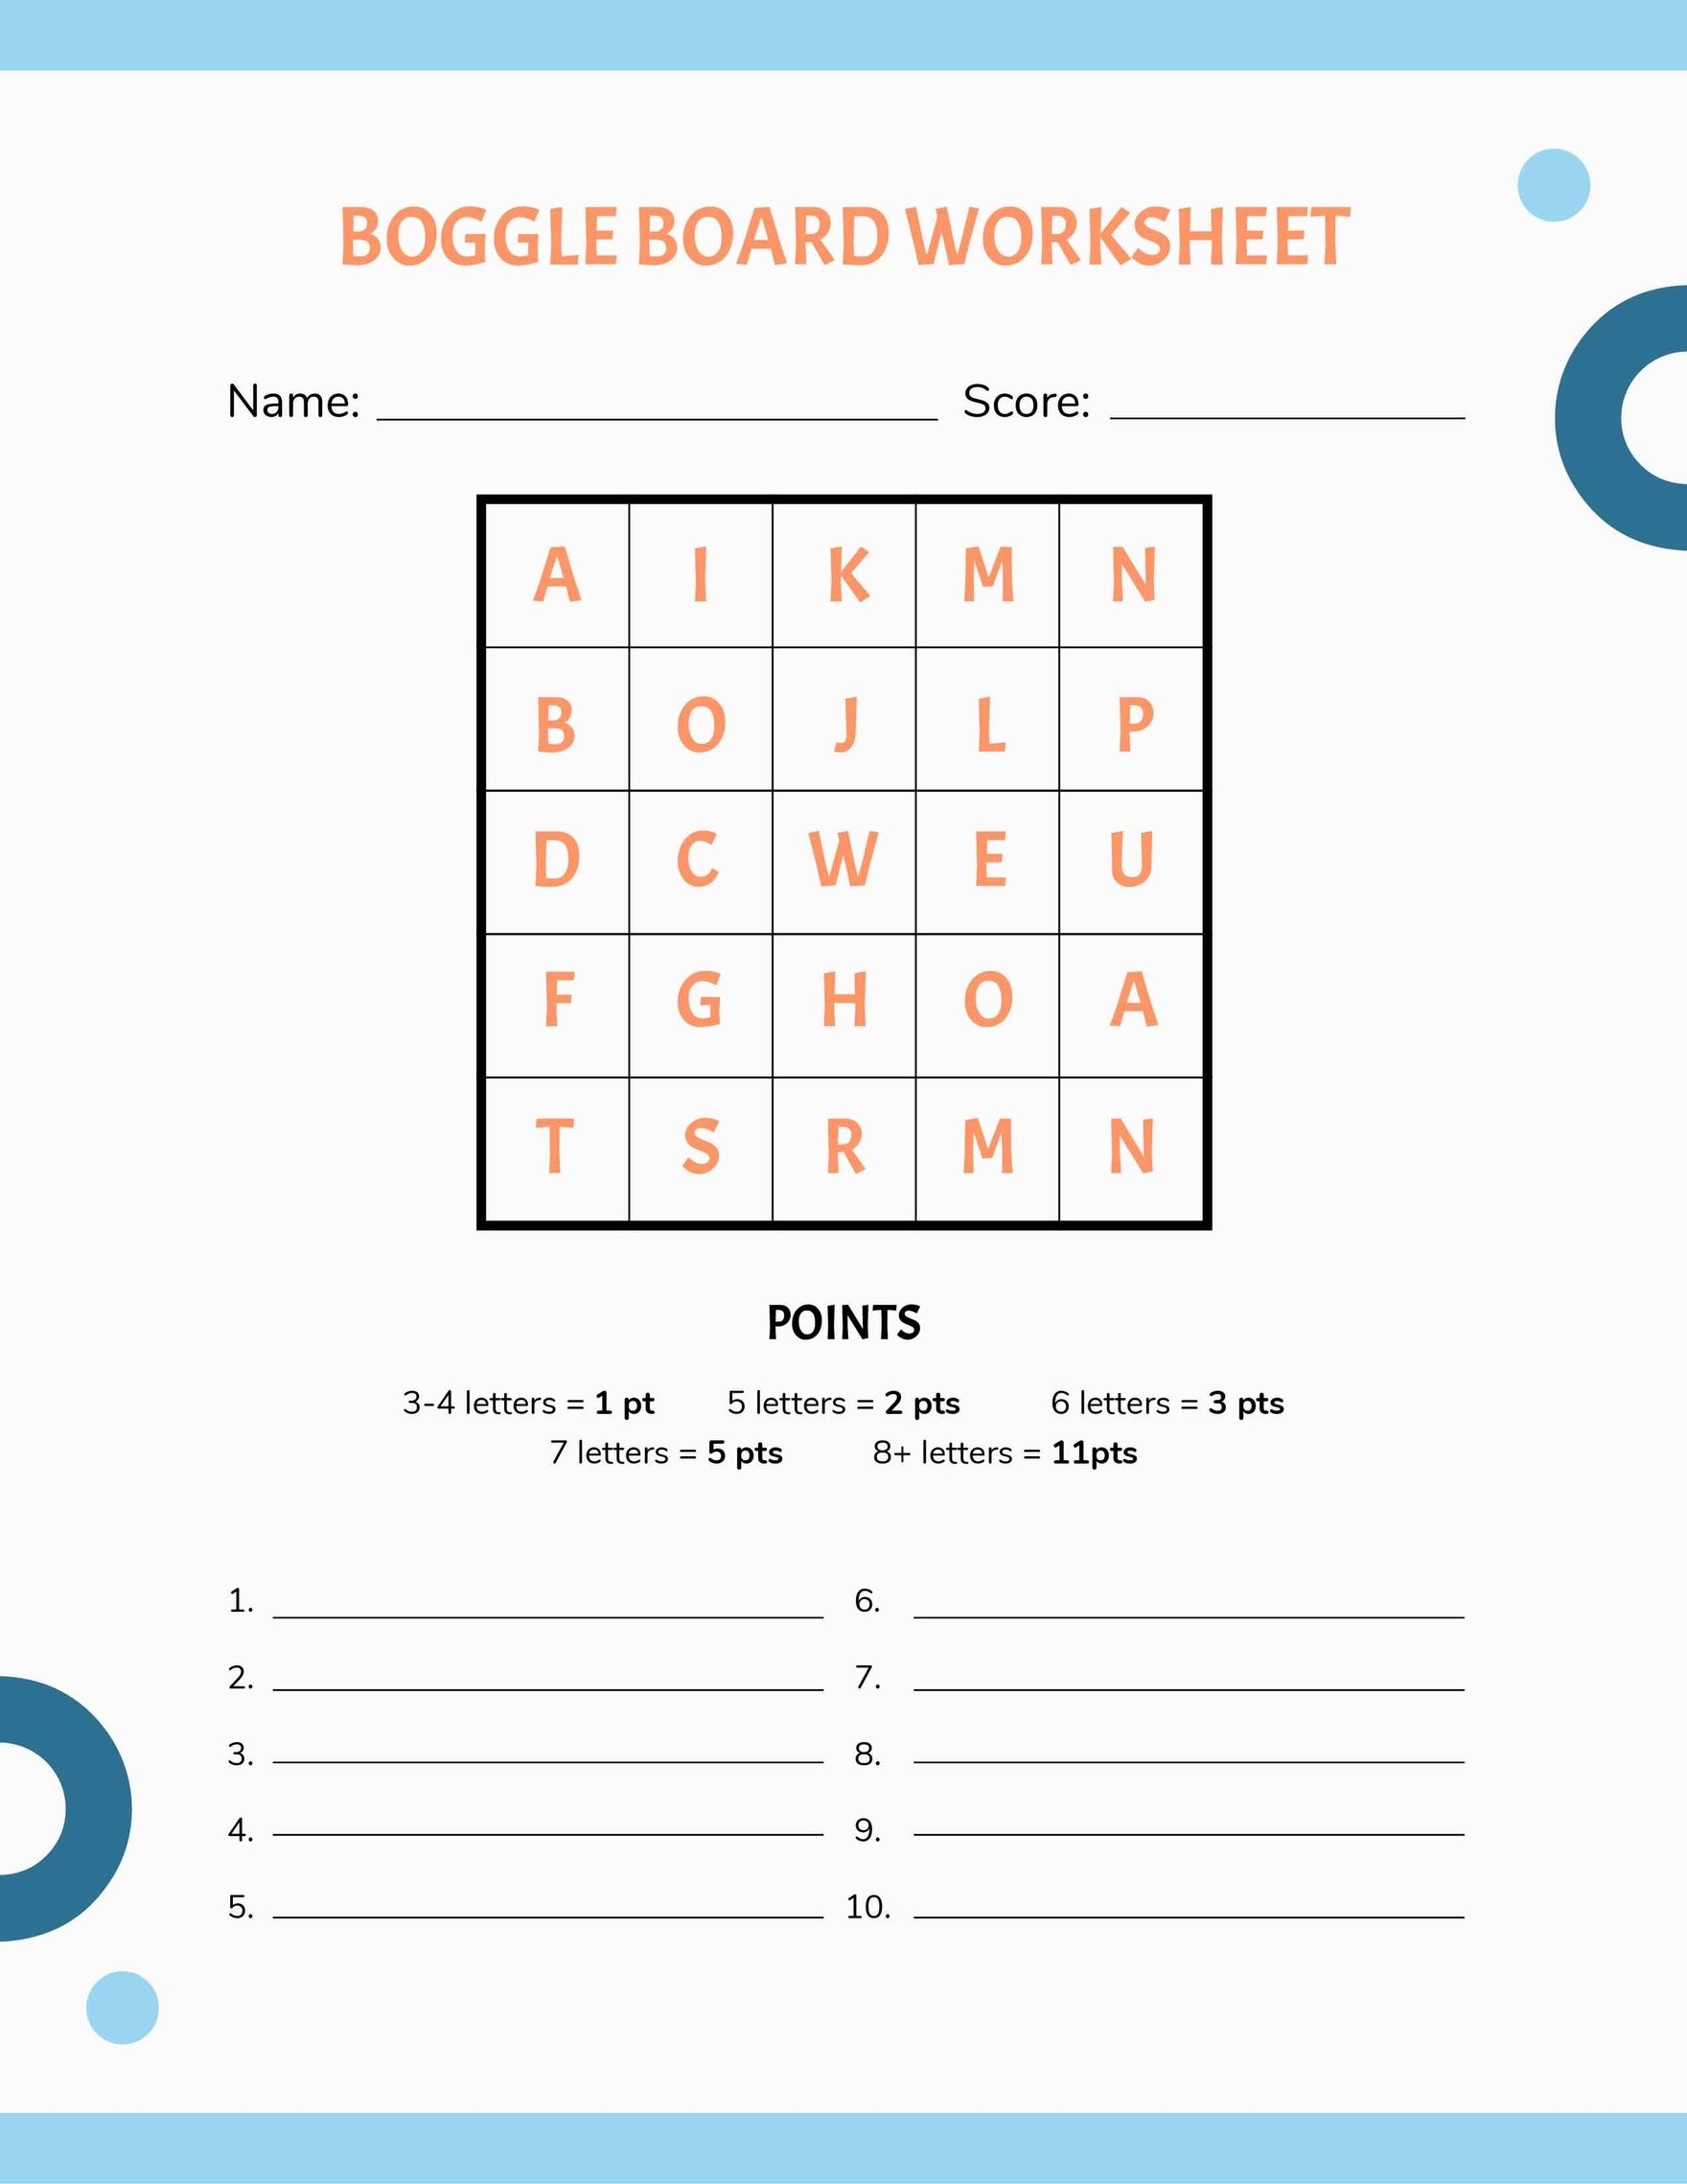 free-math-boggle-board-template-google-docs-word-apple-pages-pdf